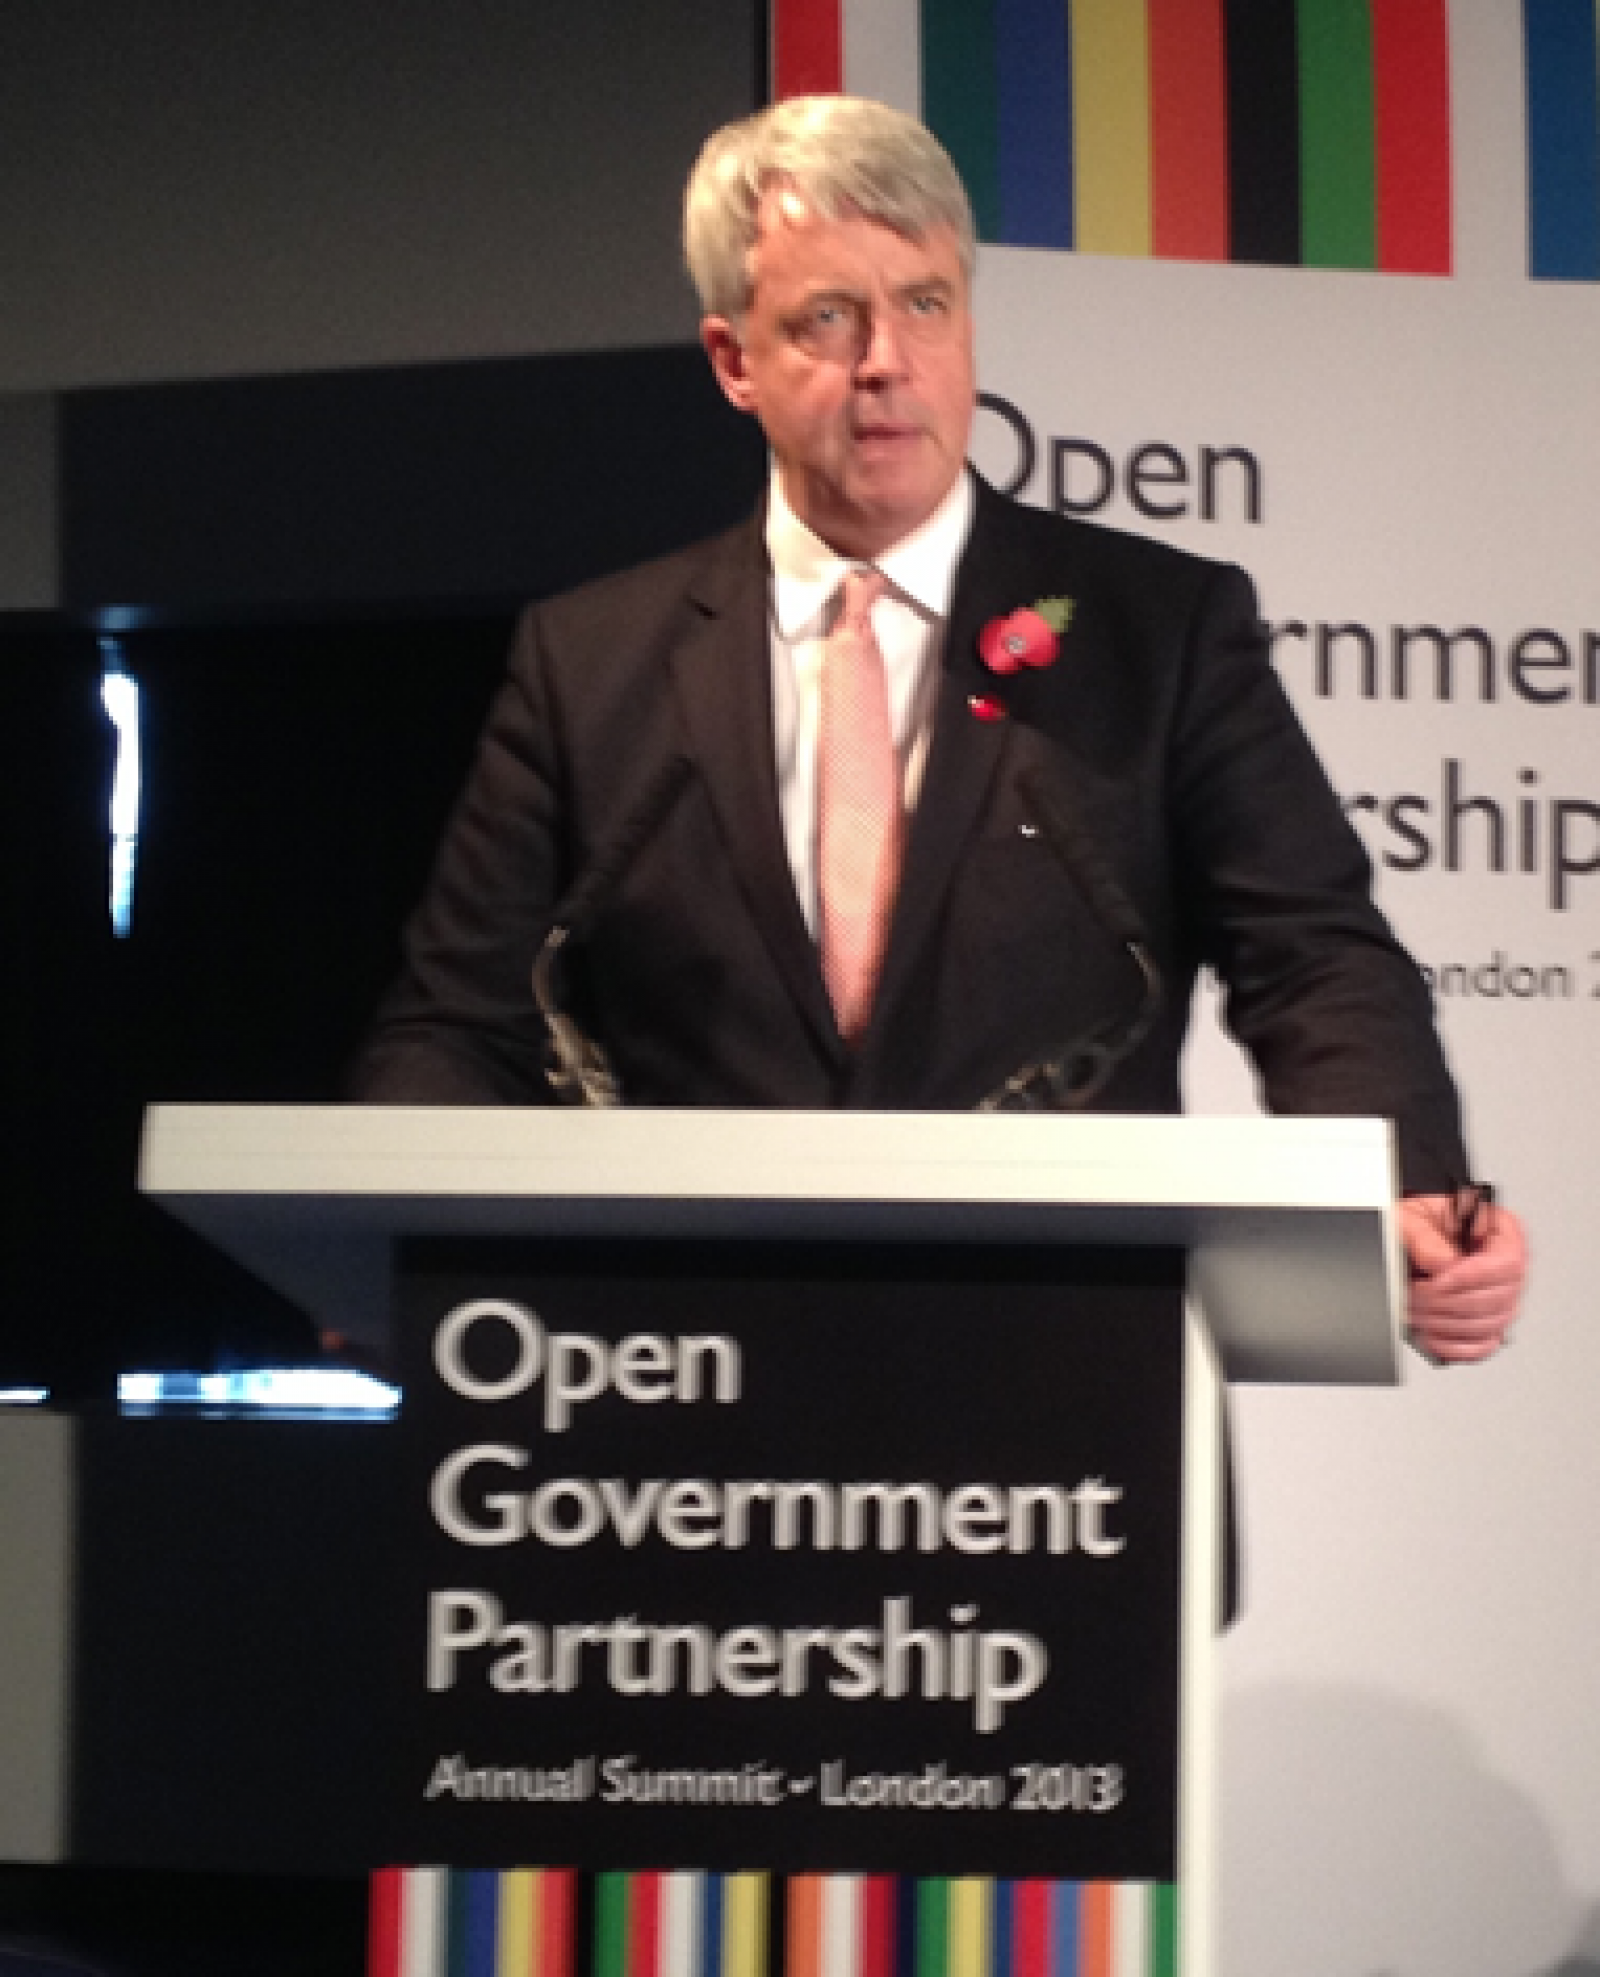 Legislative Openness Working Group Launched at Open Government Summit in London 